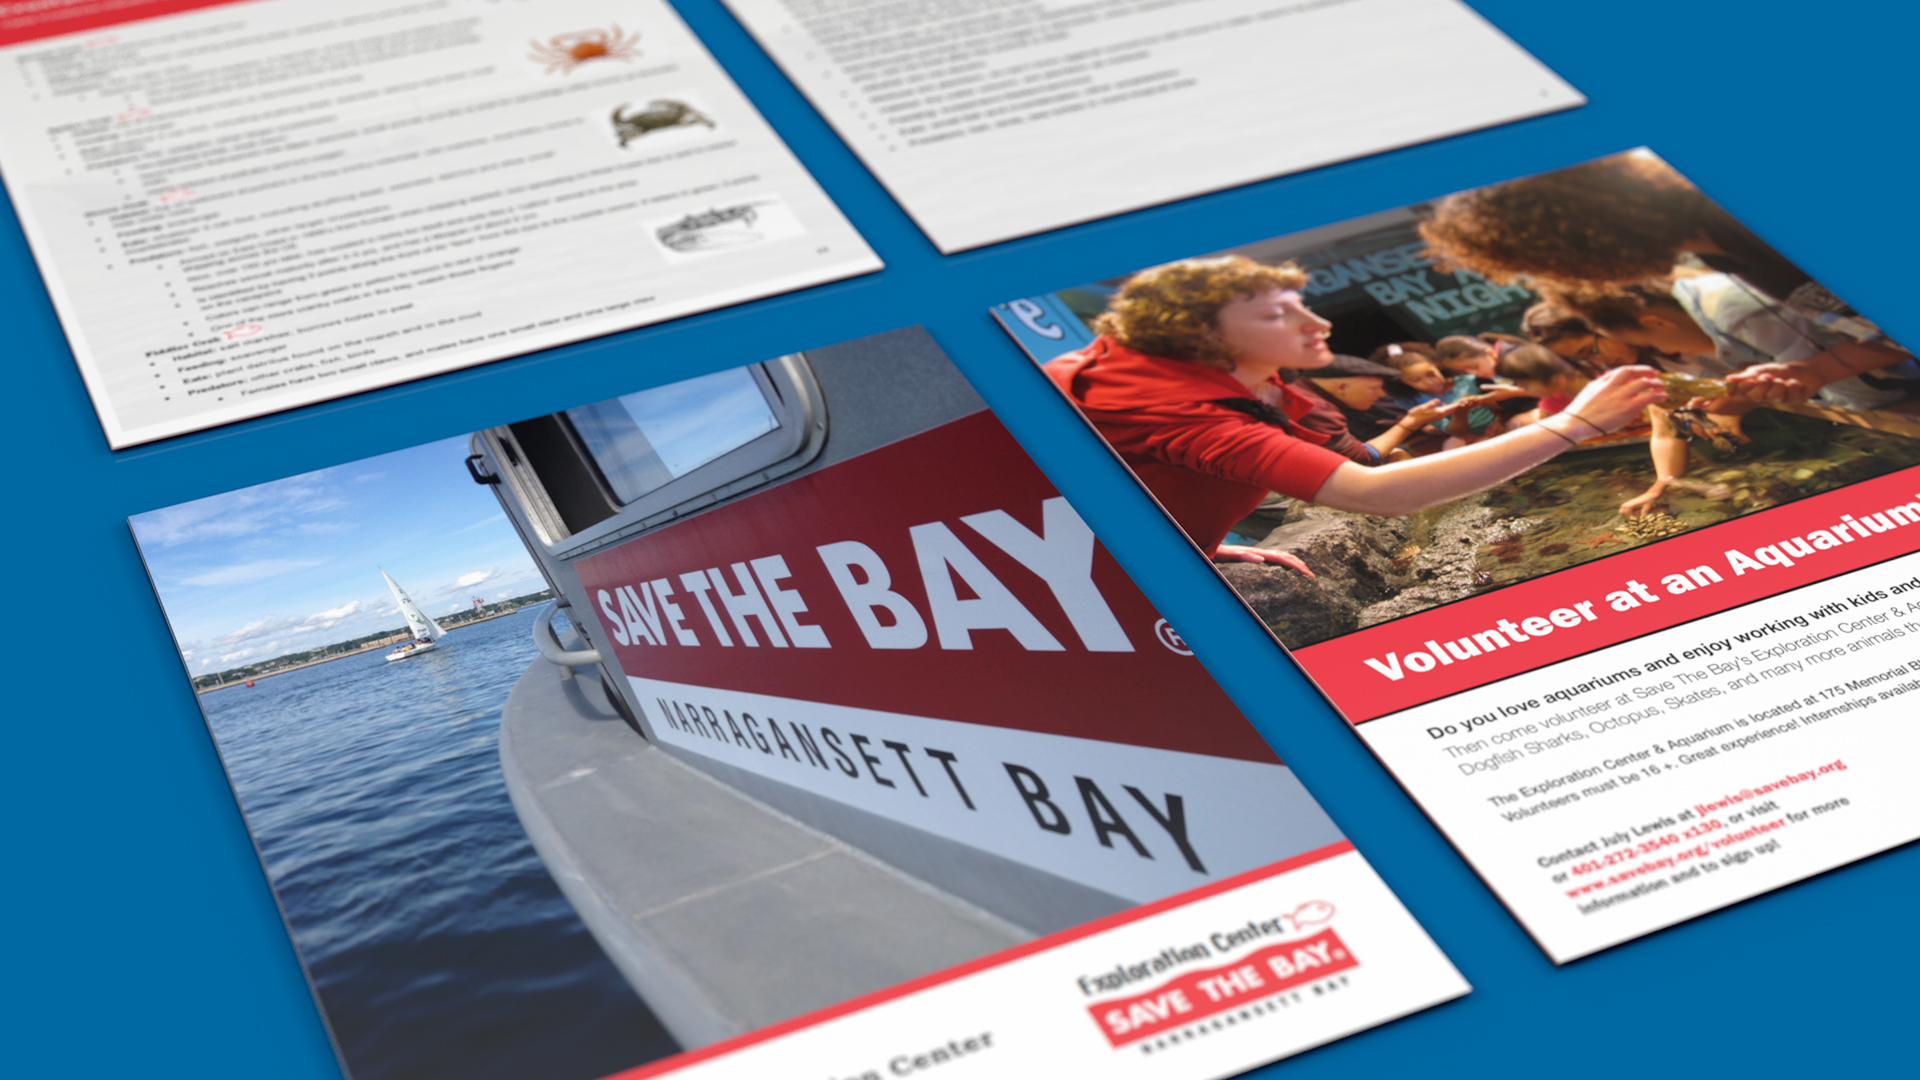 Graphic Design For Save The Bay